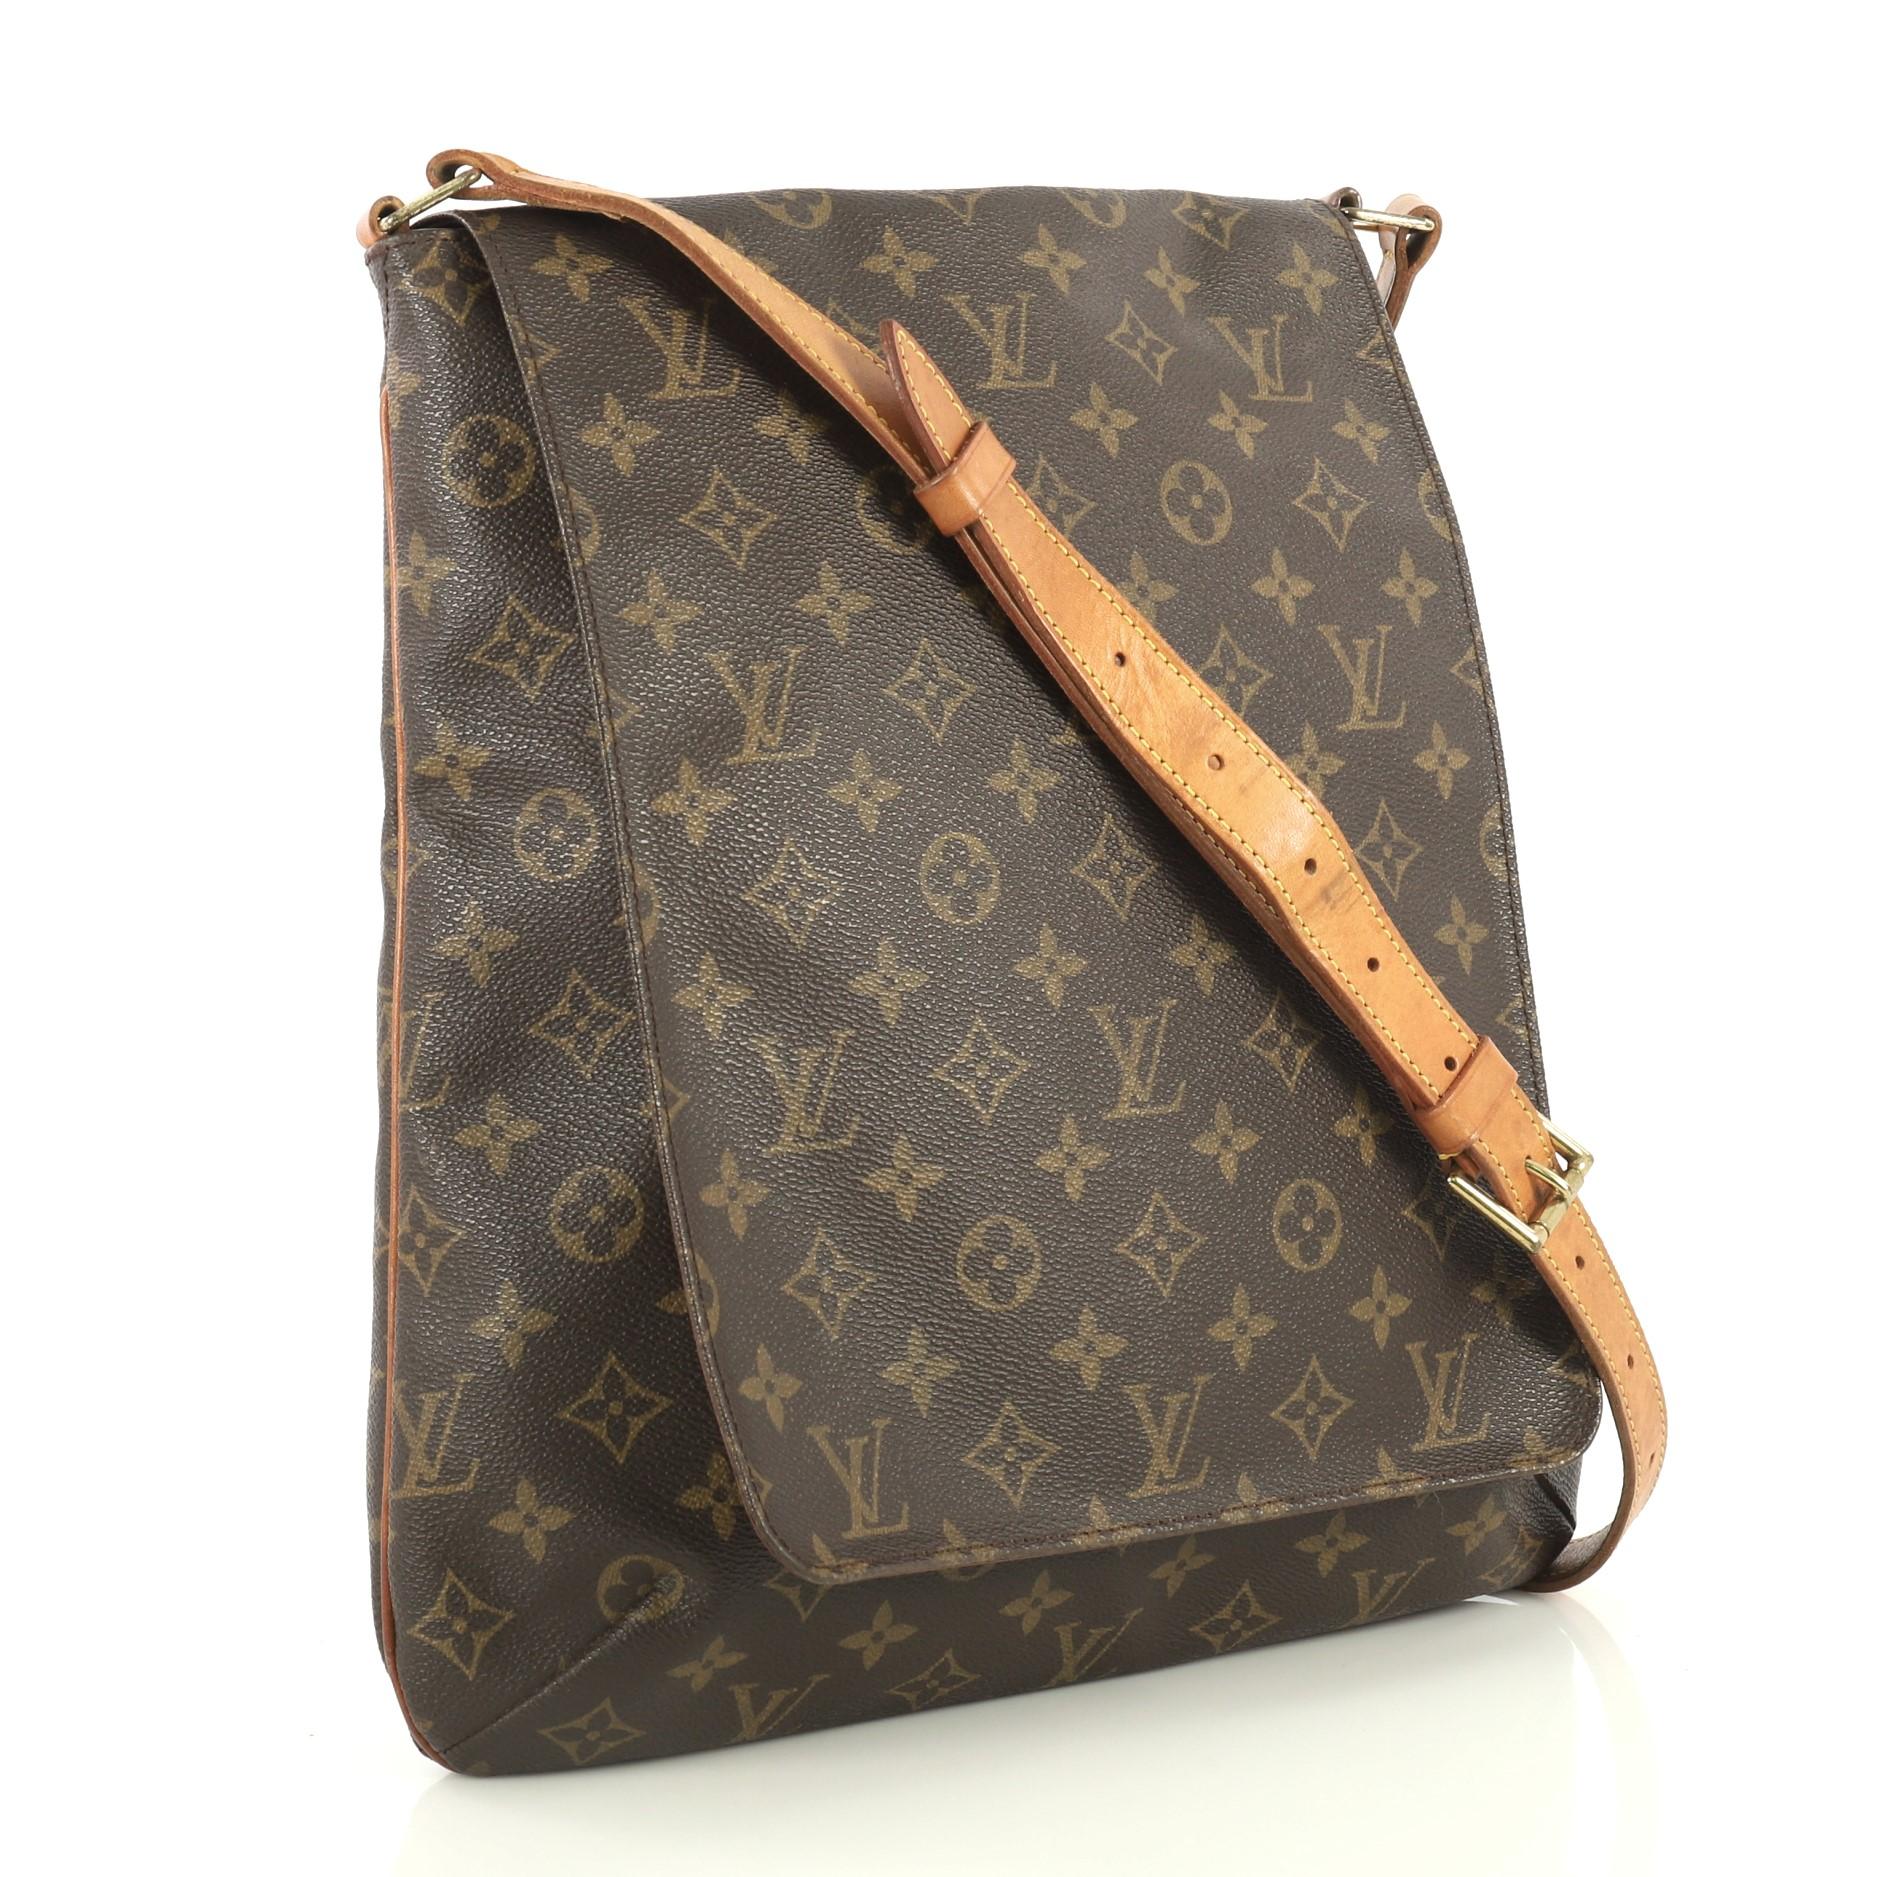 This Louis Vuitton Musette Salsa Handbag Monogram Canvas GM, crafted from brown monogram coated canvas, features adjustable cowhide leather strap, full frontal flap, and gold-tone hardware. Its hidden snap closure opens to a brown microfiber